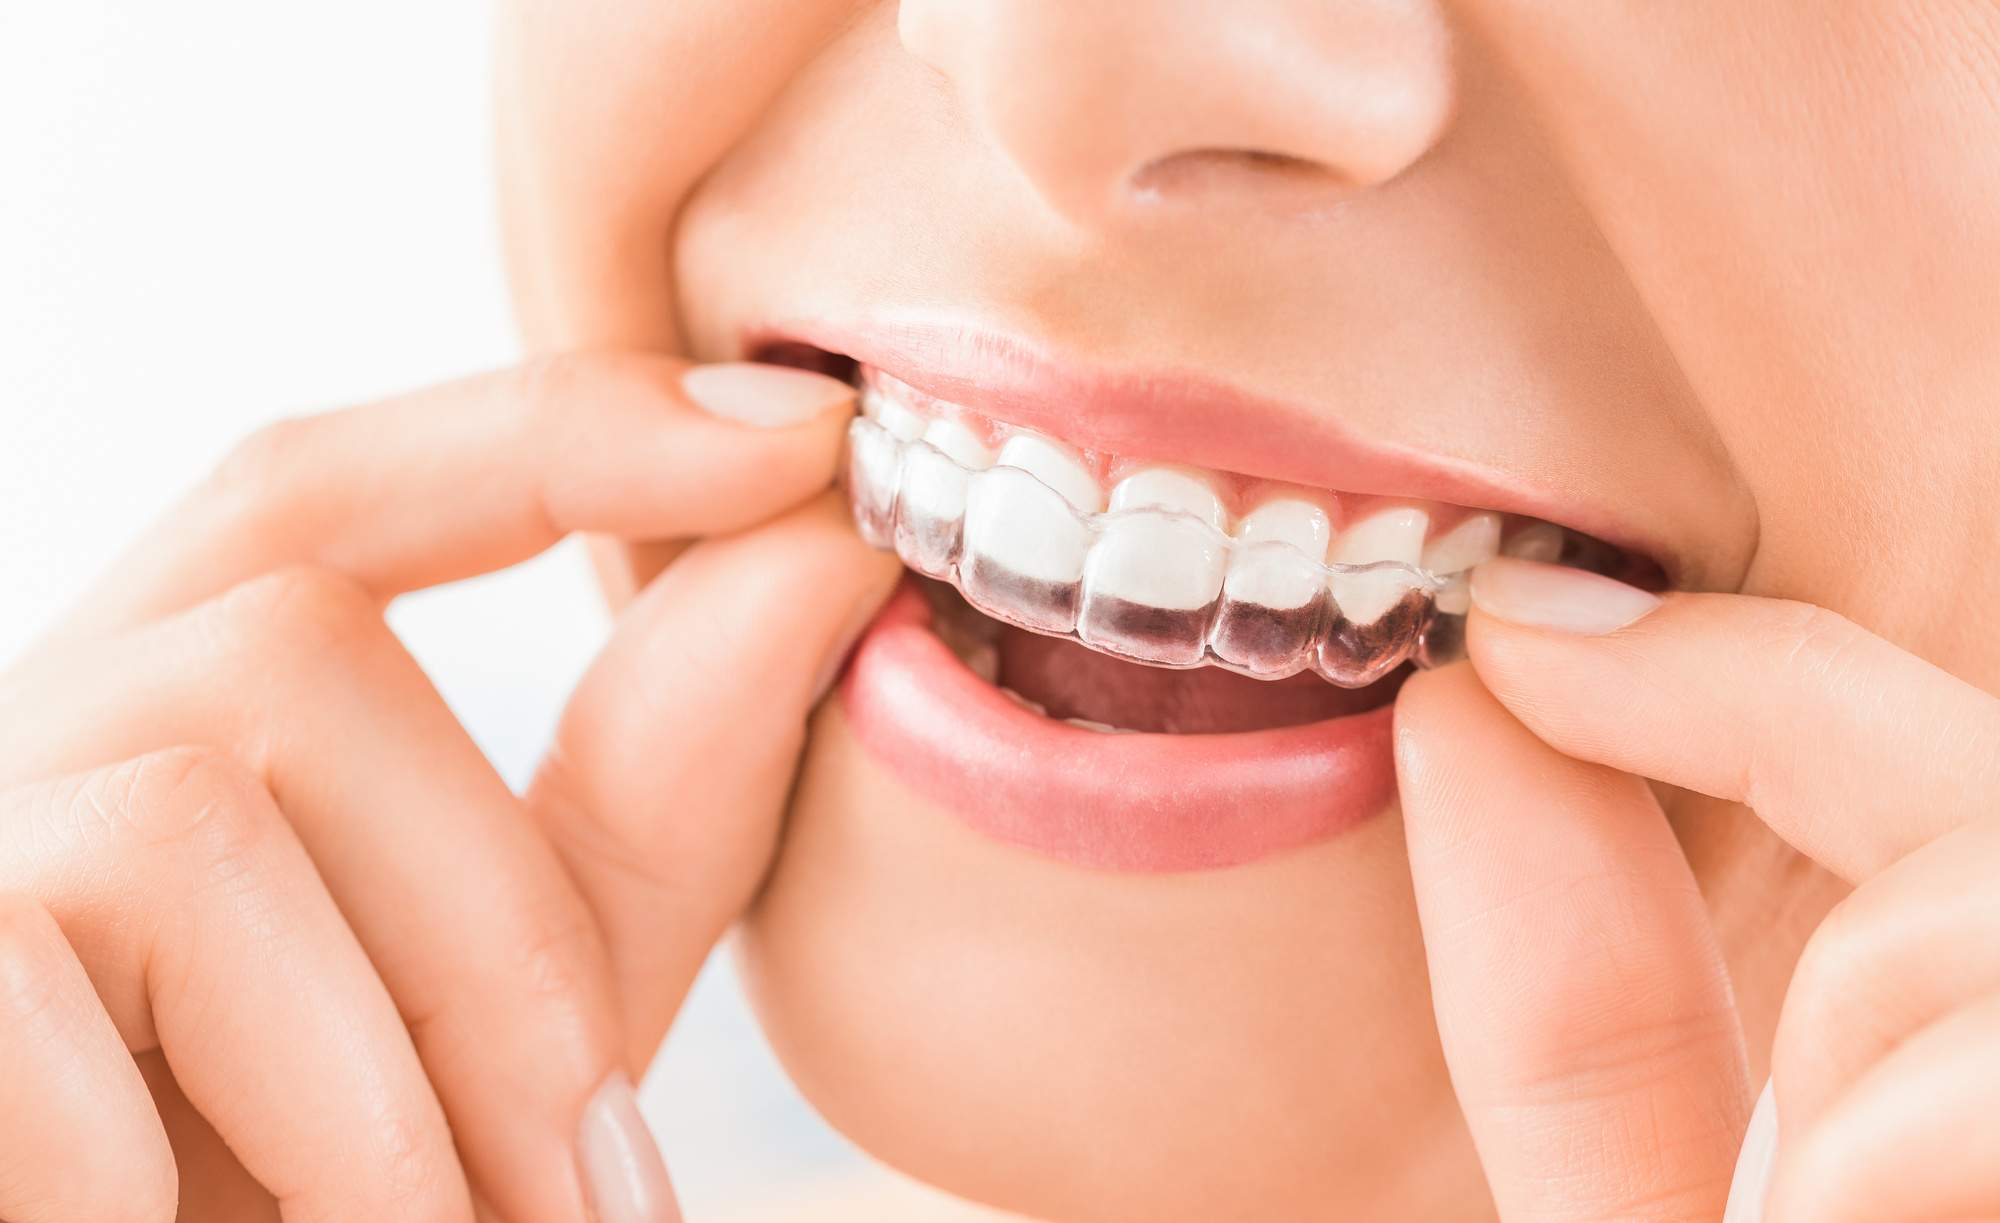 Top 5 Factors to Consider When Choosing Invisalign Providers